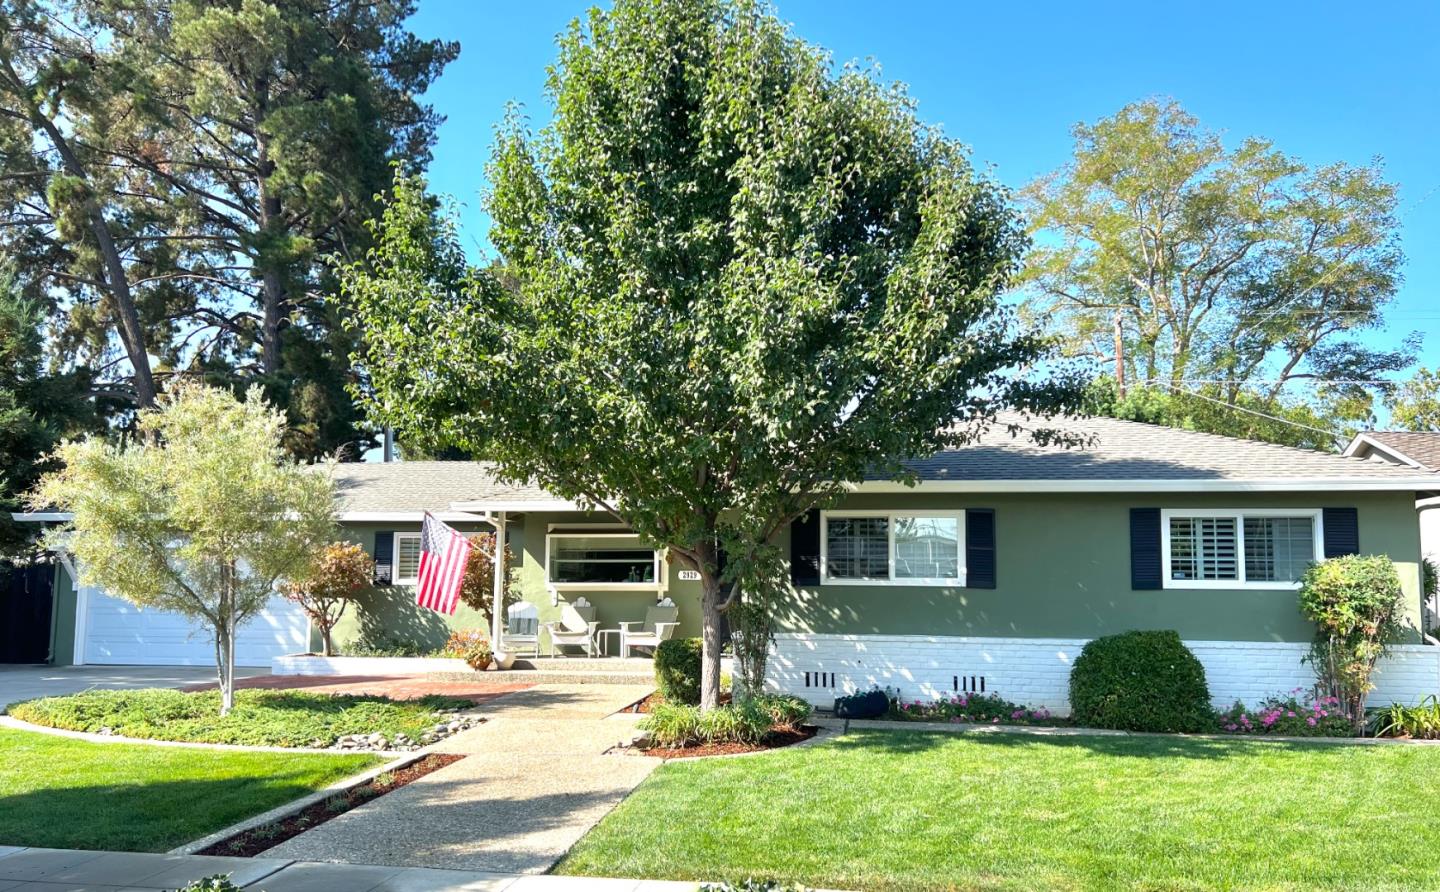 Photo of 2929 Kring Dr in San Jose, CA